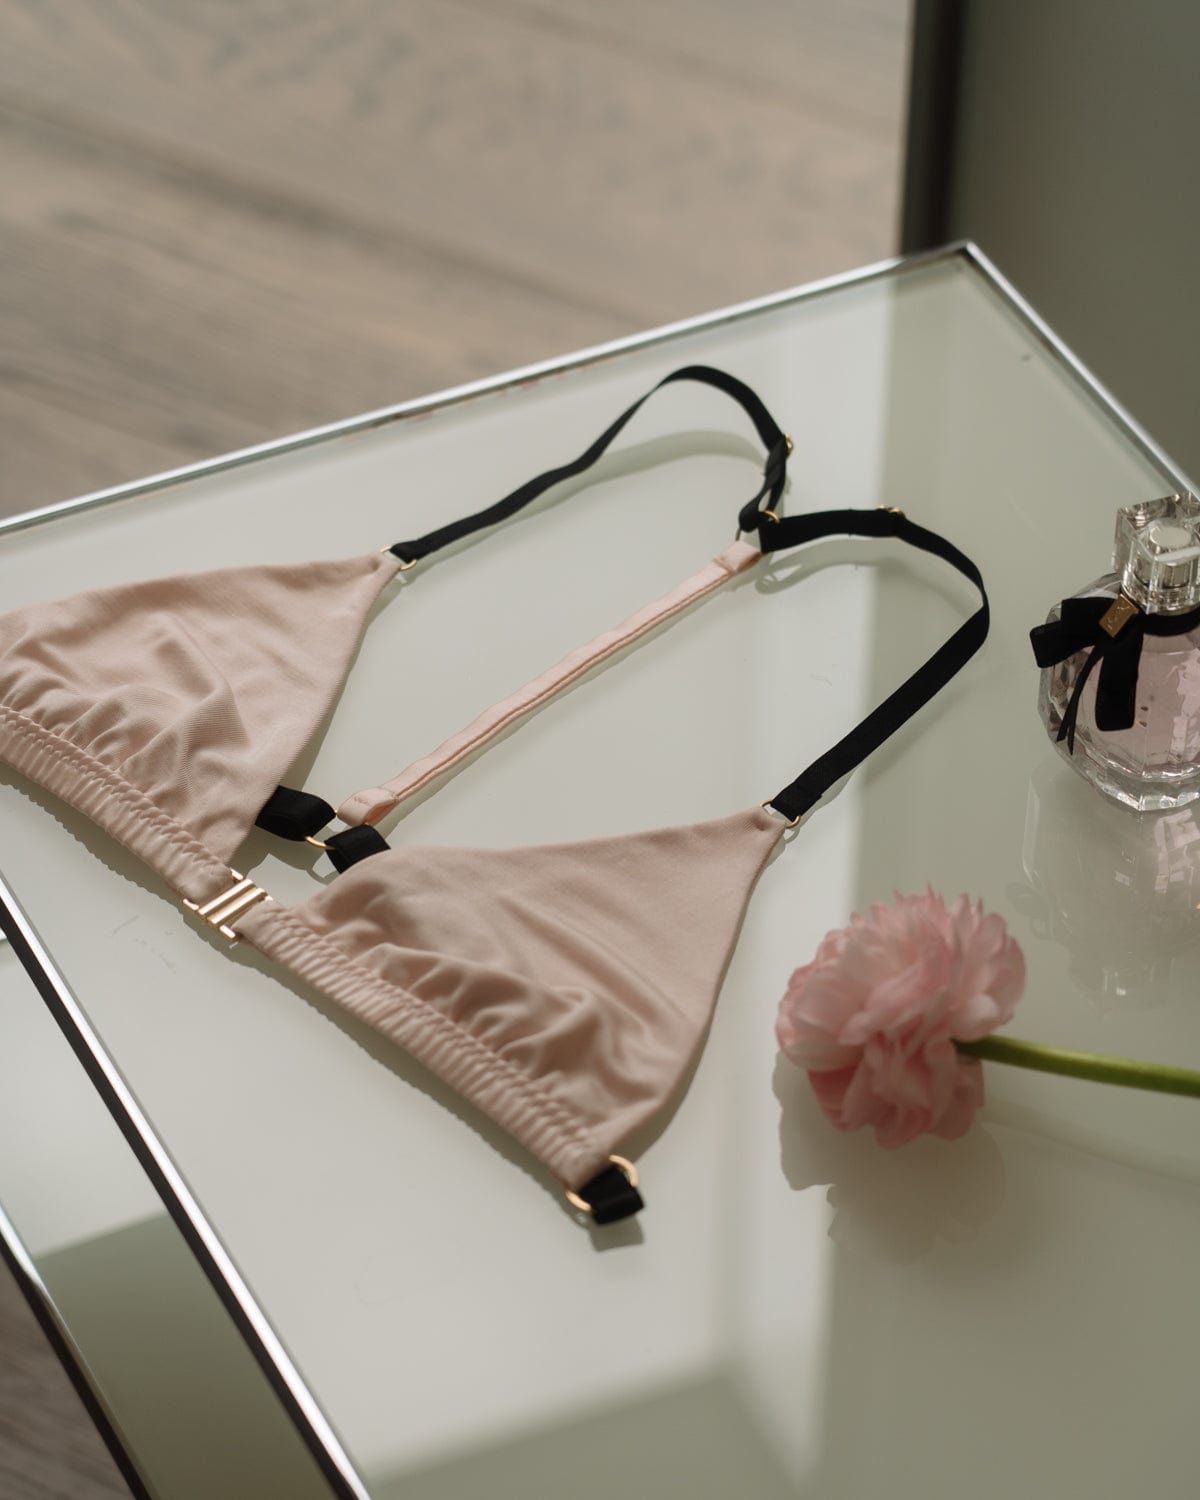 Vivi Leigh London lingerie Blush Pink Silk Jersey Triangle Bralette sexy harness luxury lingerie uk sustainable brand